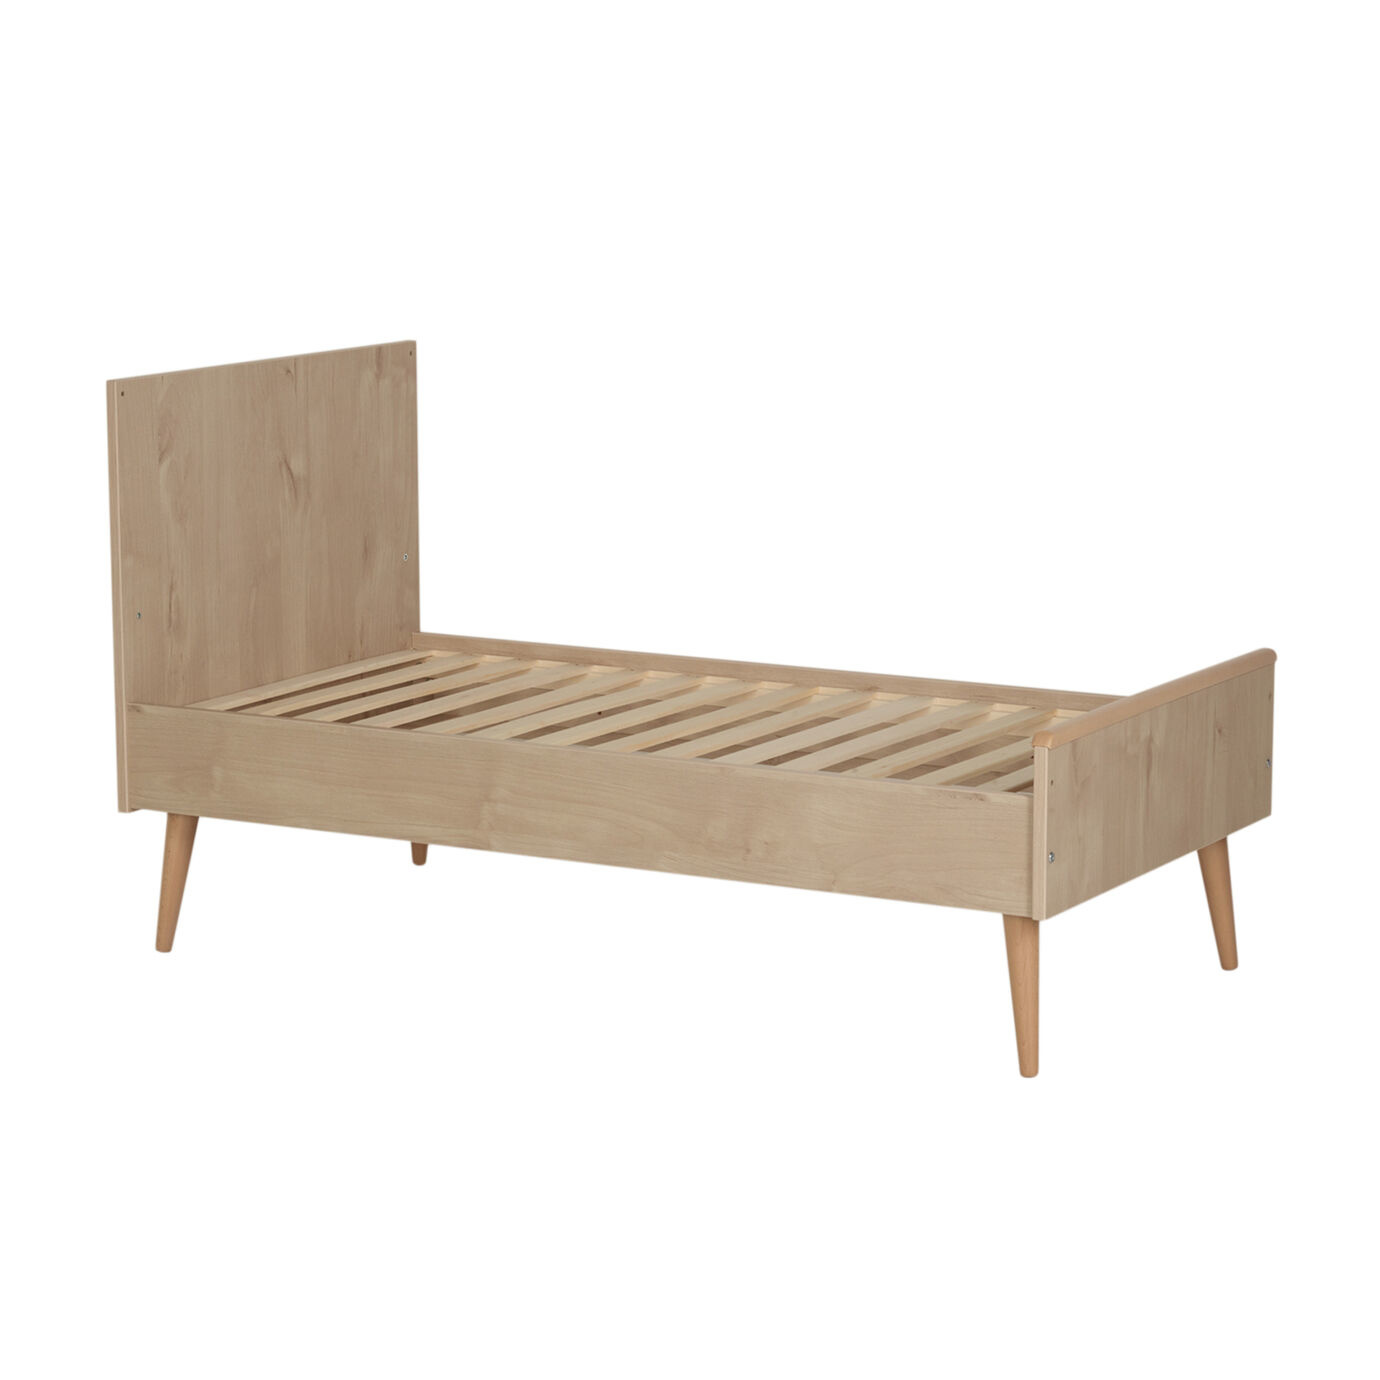 Bed 70x140cm + Commode + kast  Quax Cocoon Natural oak-3